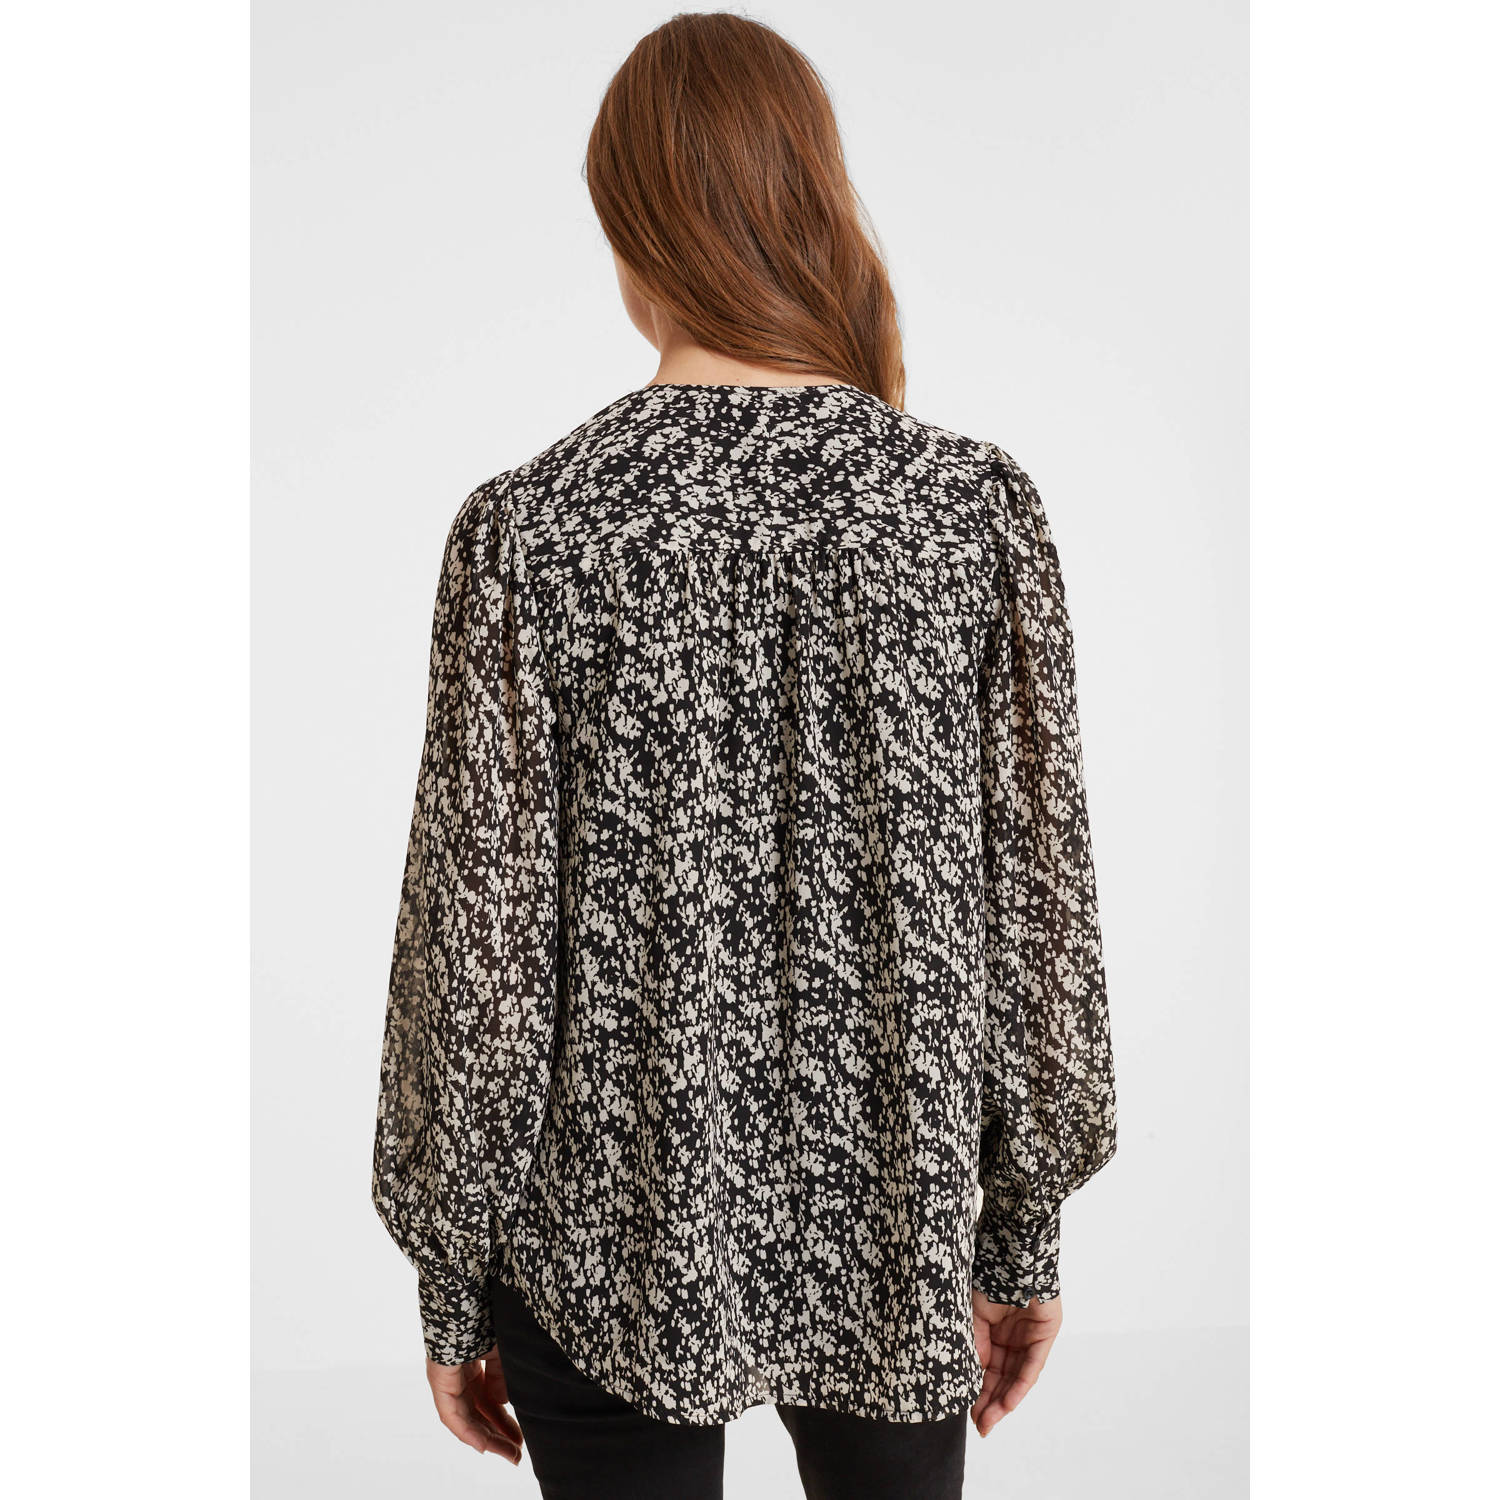 anytime geweven blouse met all over print